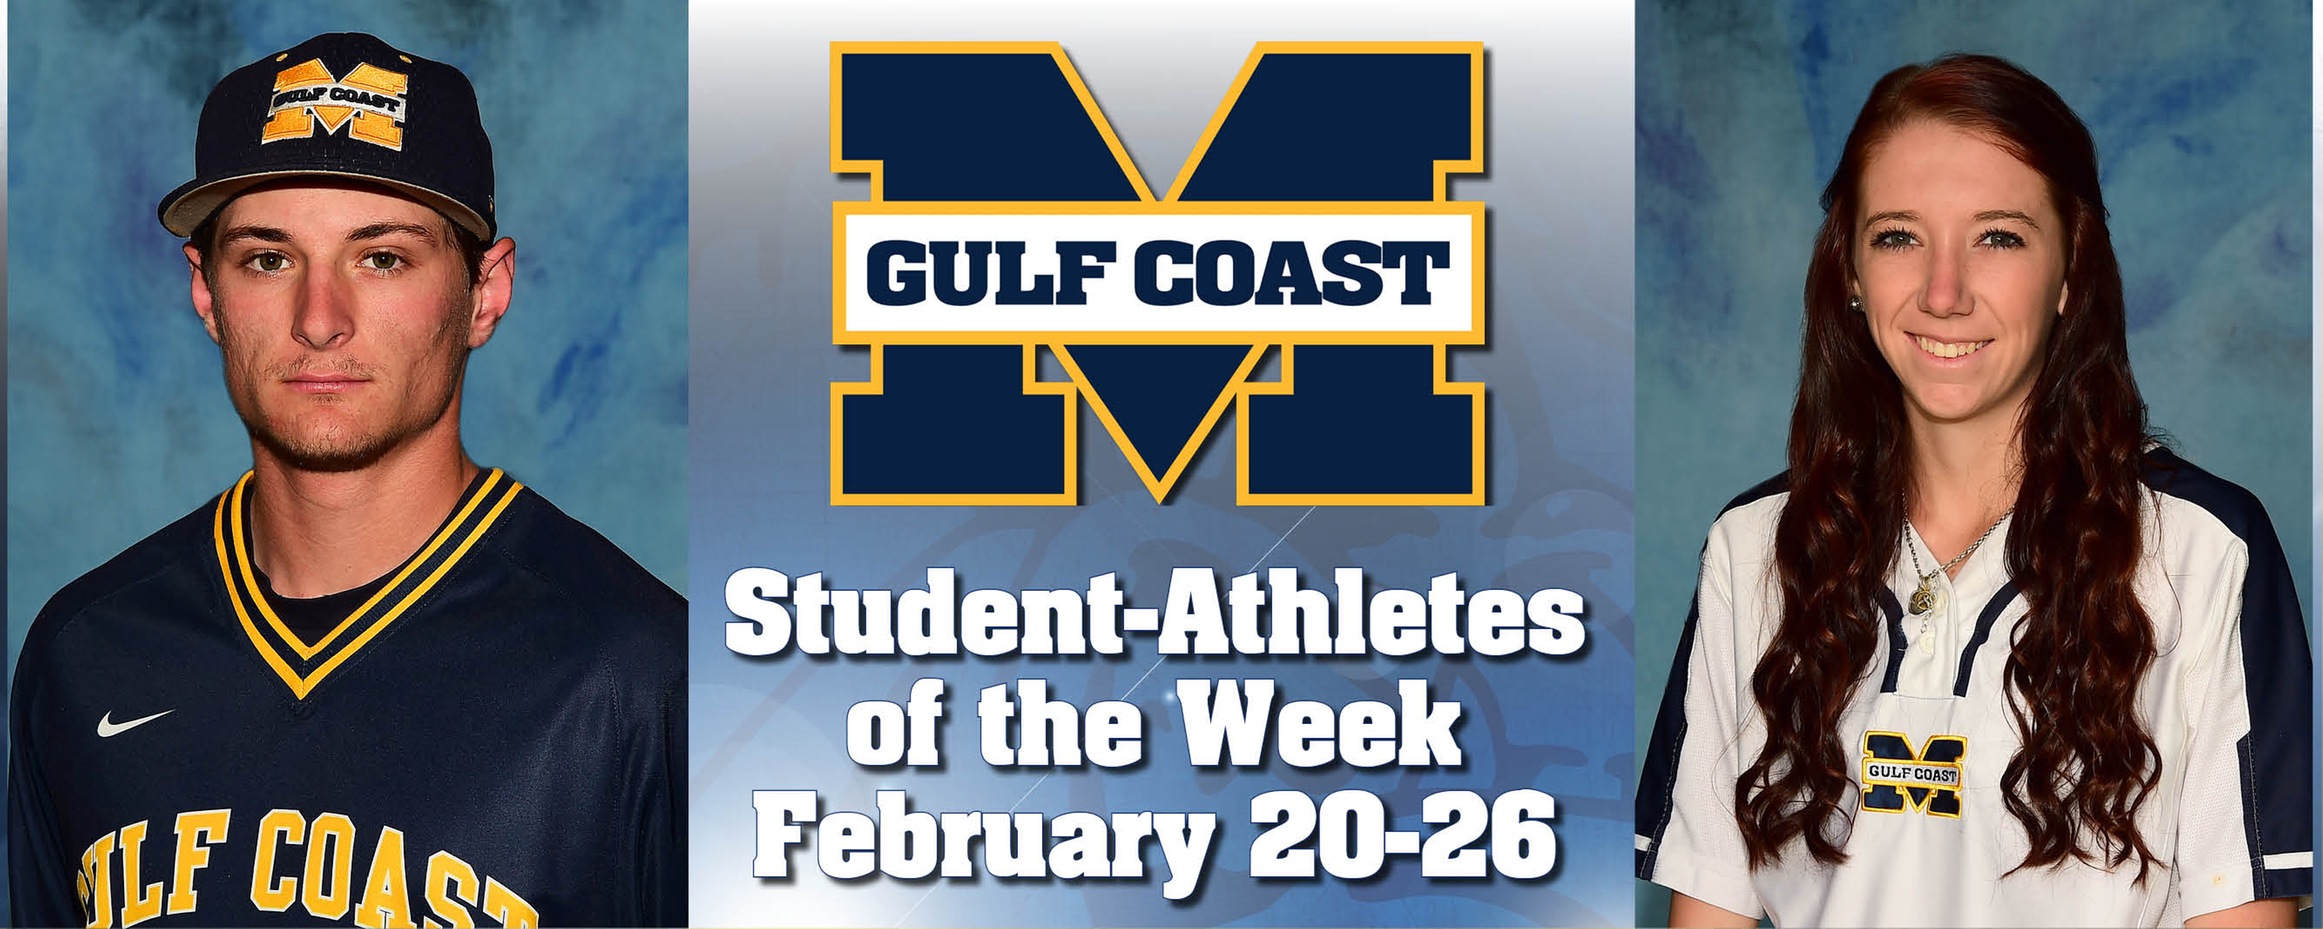 Sexton, Rhodes named MGCCC Student-Athletes of the Week